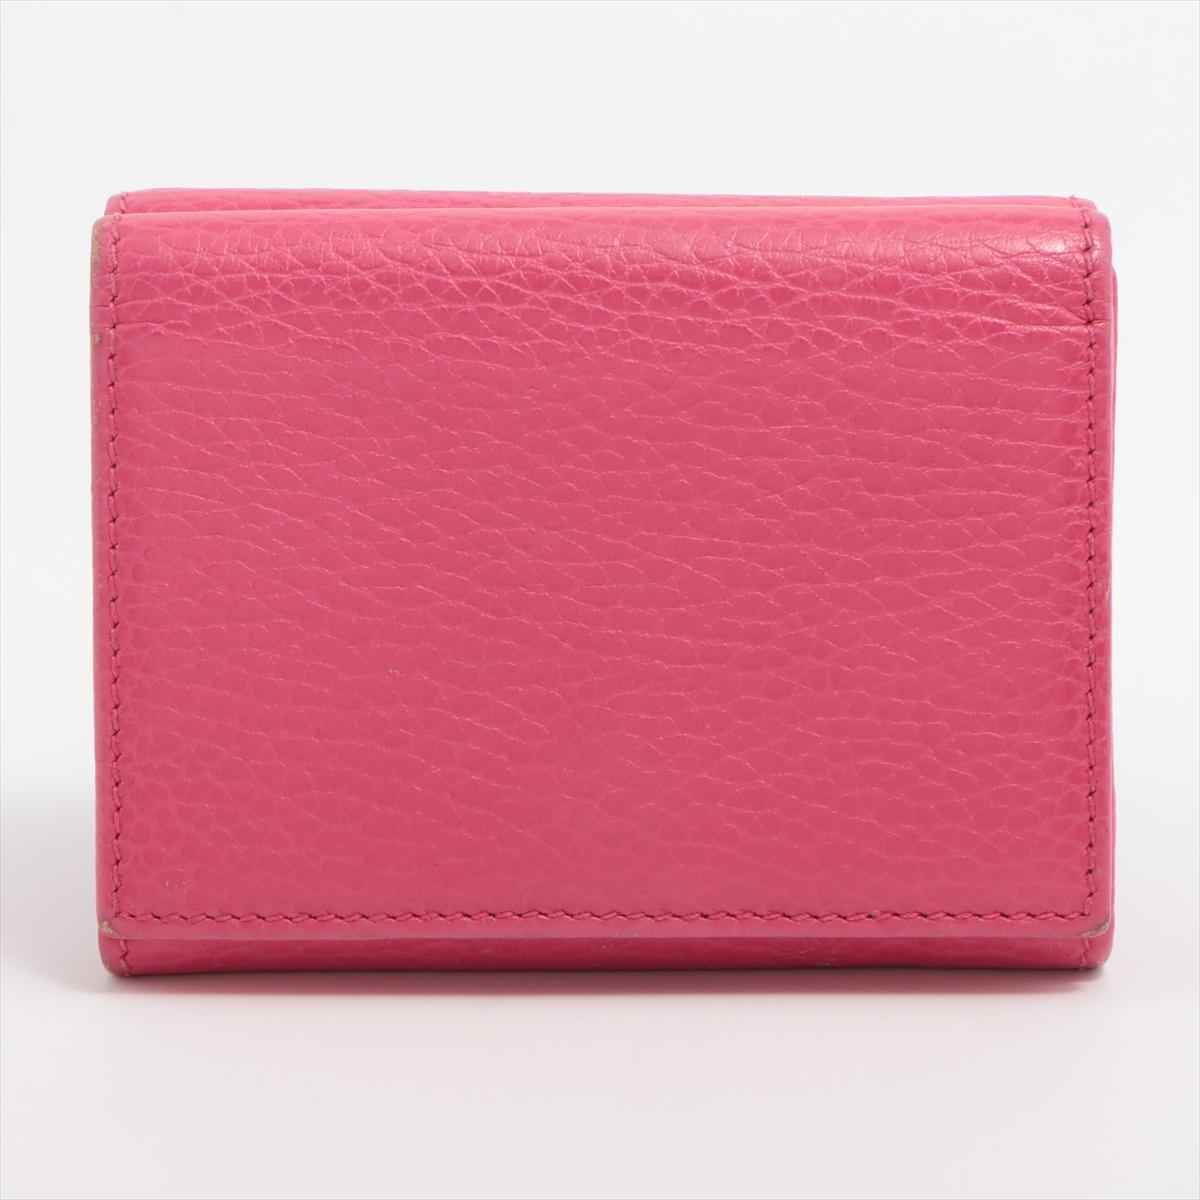 Gucci GG Marmont Leather Compact Wallet Pink In Good Condition For Sale In Indianapolis, IN